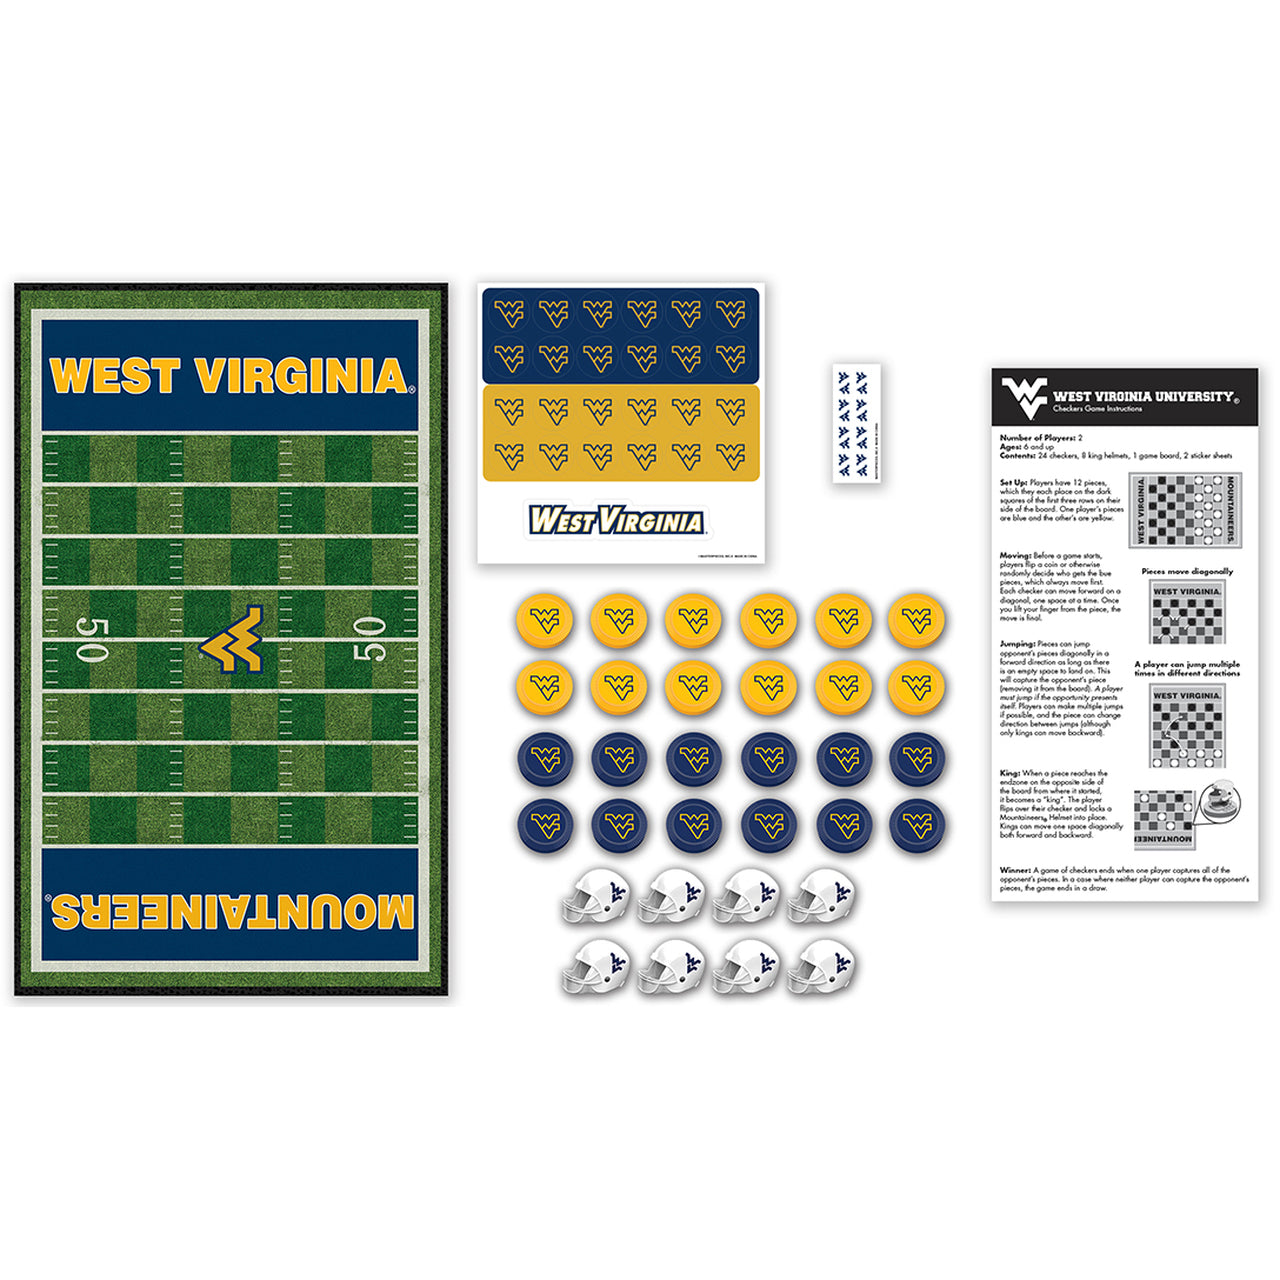 West Virginia {WVU} Mountaineers Checkers Board Game by Masterpieces